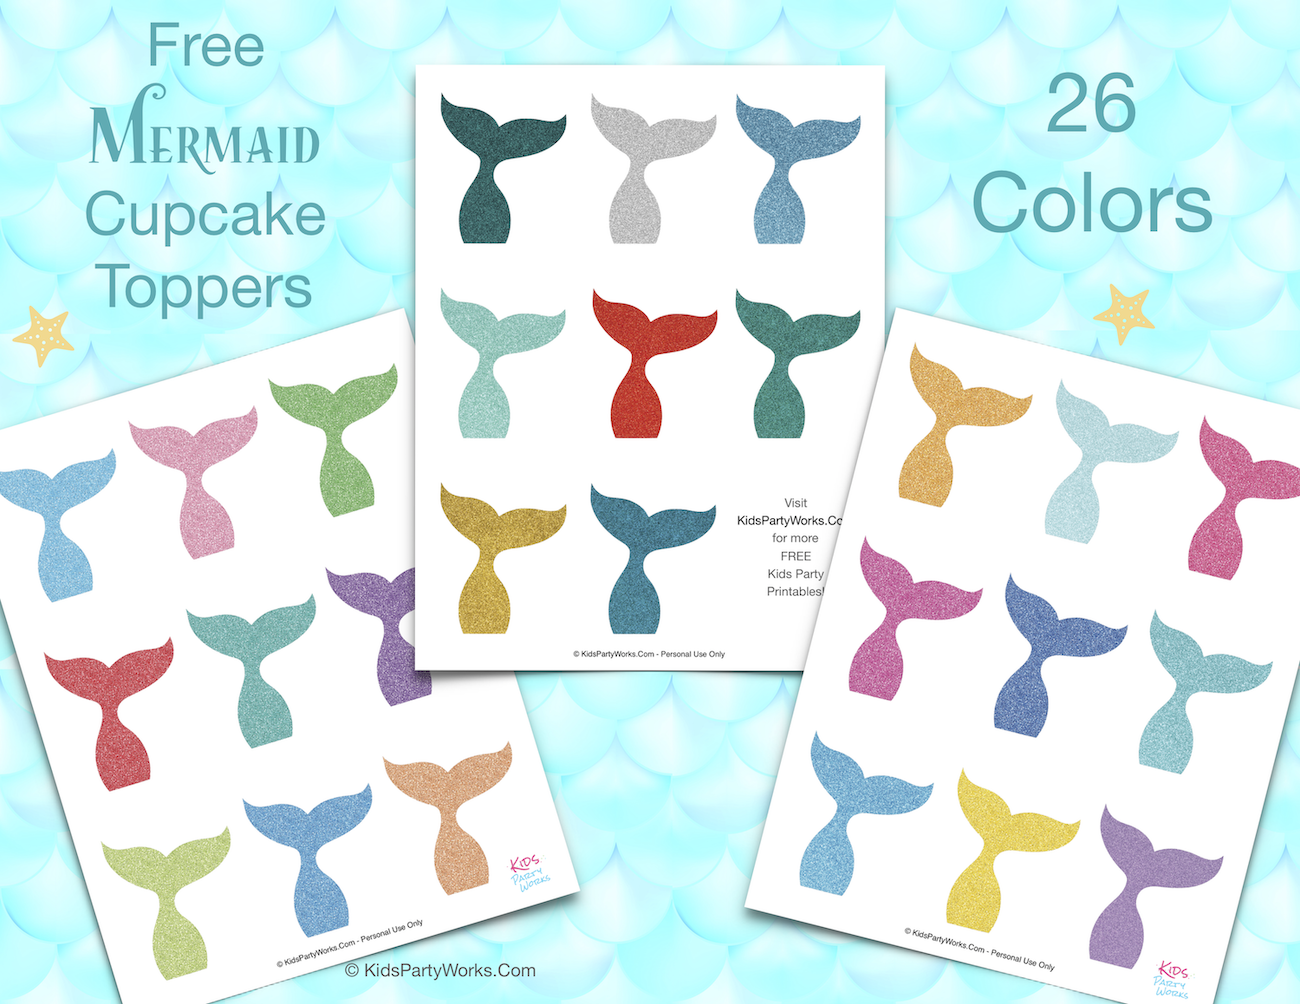 Free Mermaid Tail Cupcake Toppers. They are also great as Mermaid Stickers. KidsPartyWorks.Com